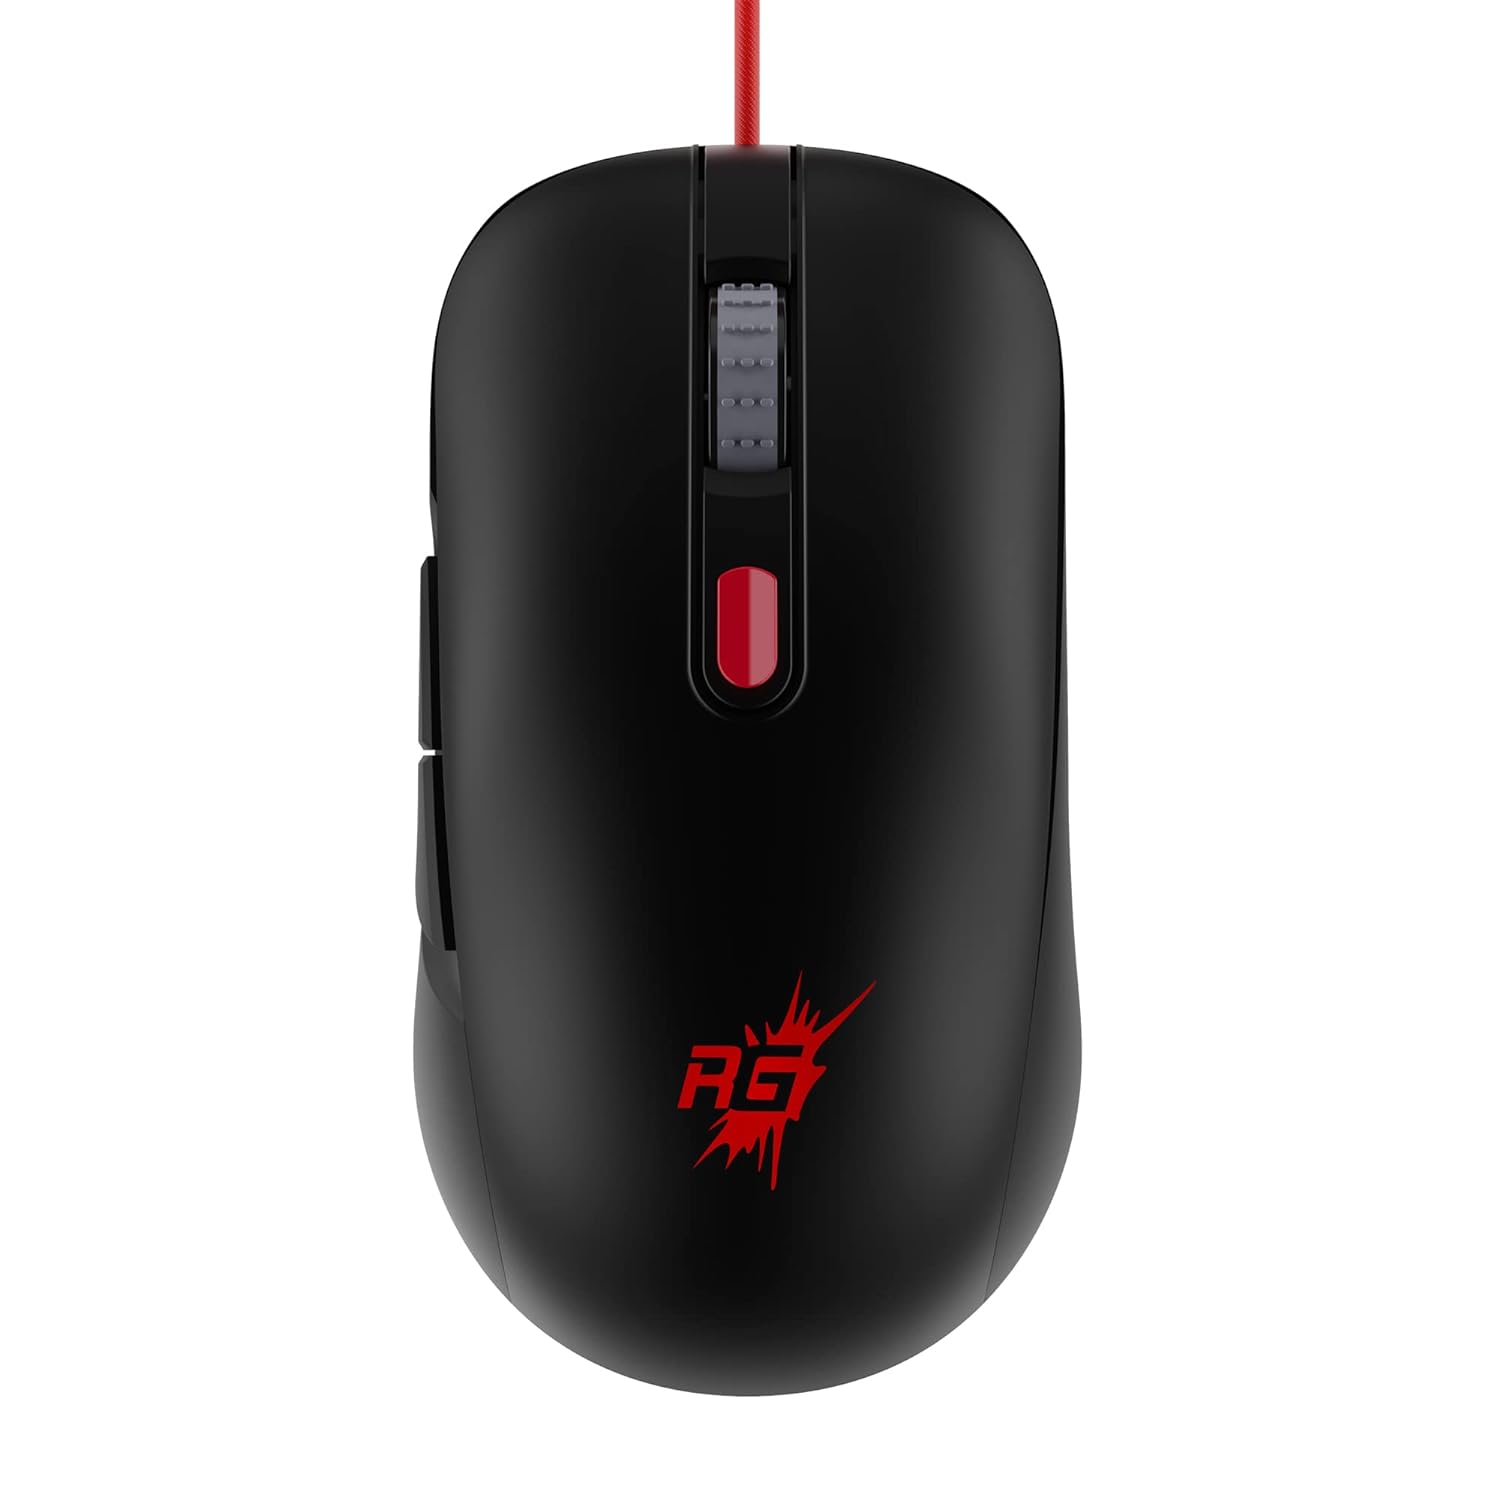 Redgear X12 v2 USB Wired Gaming Mouse with LED, Upto 10000 DPI